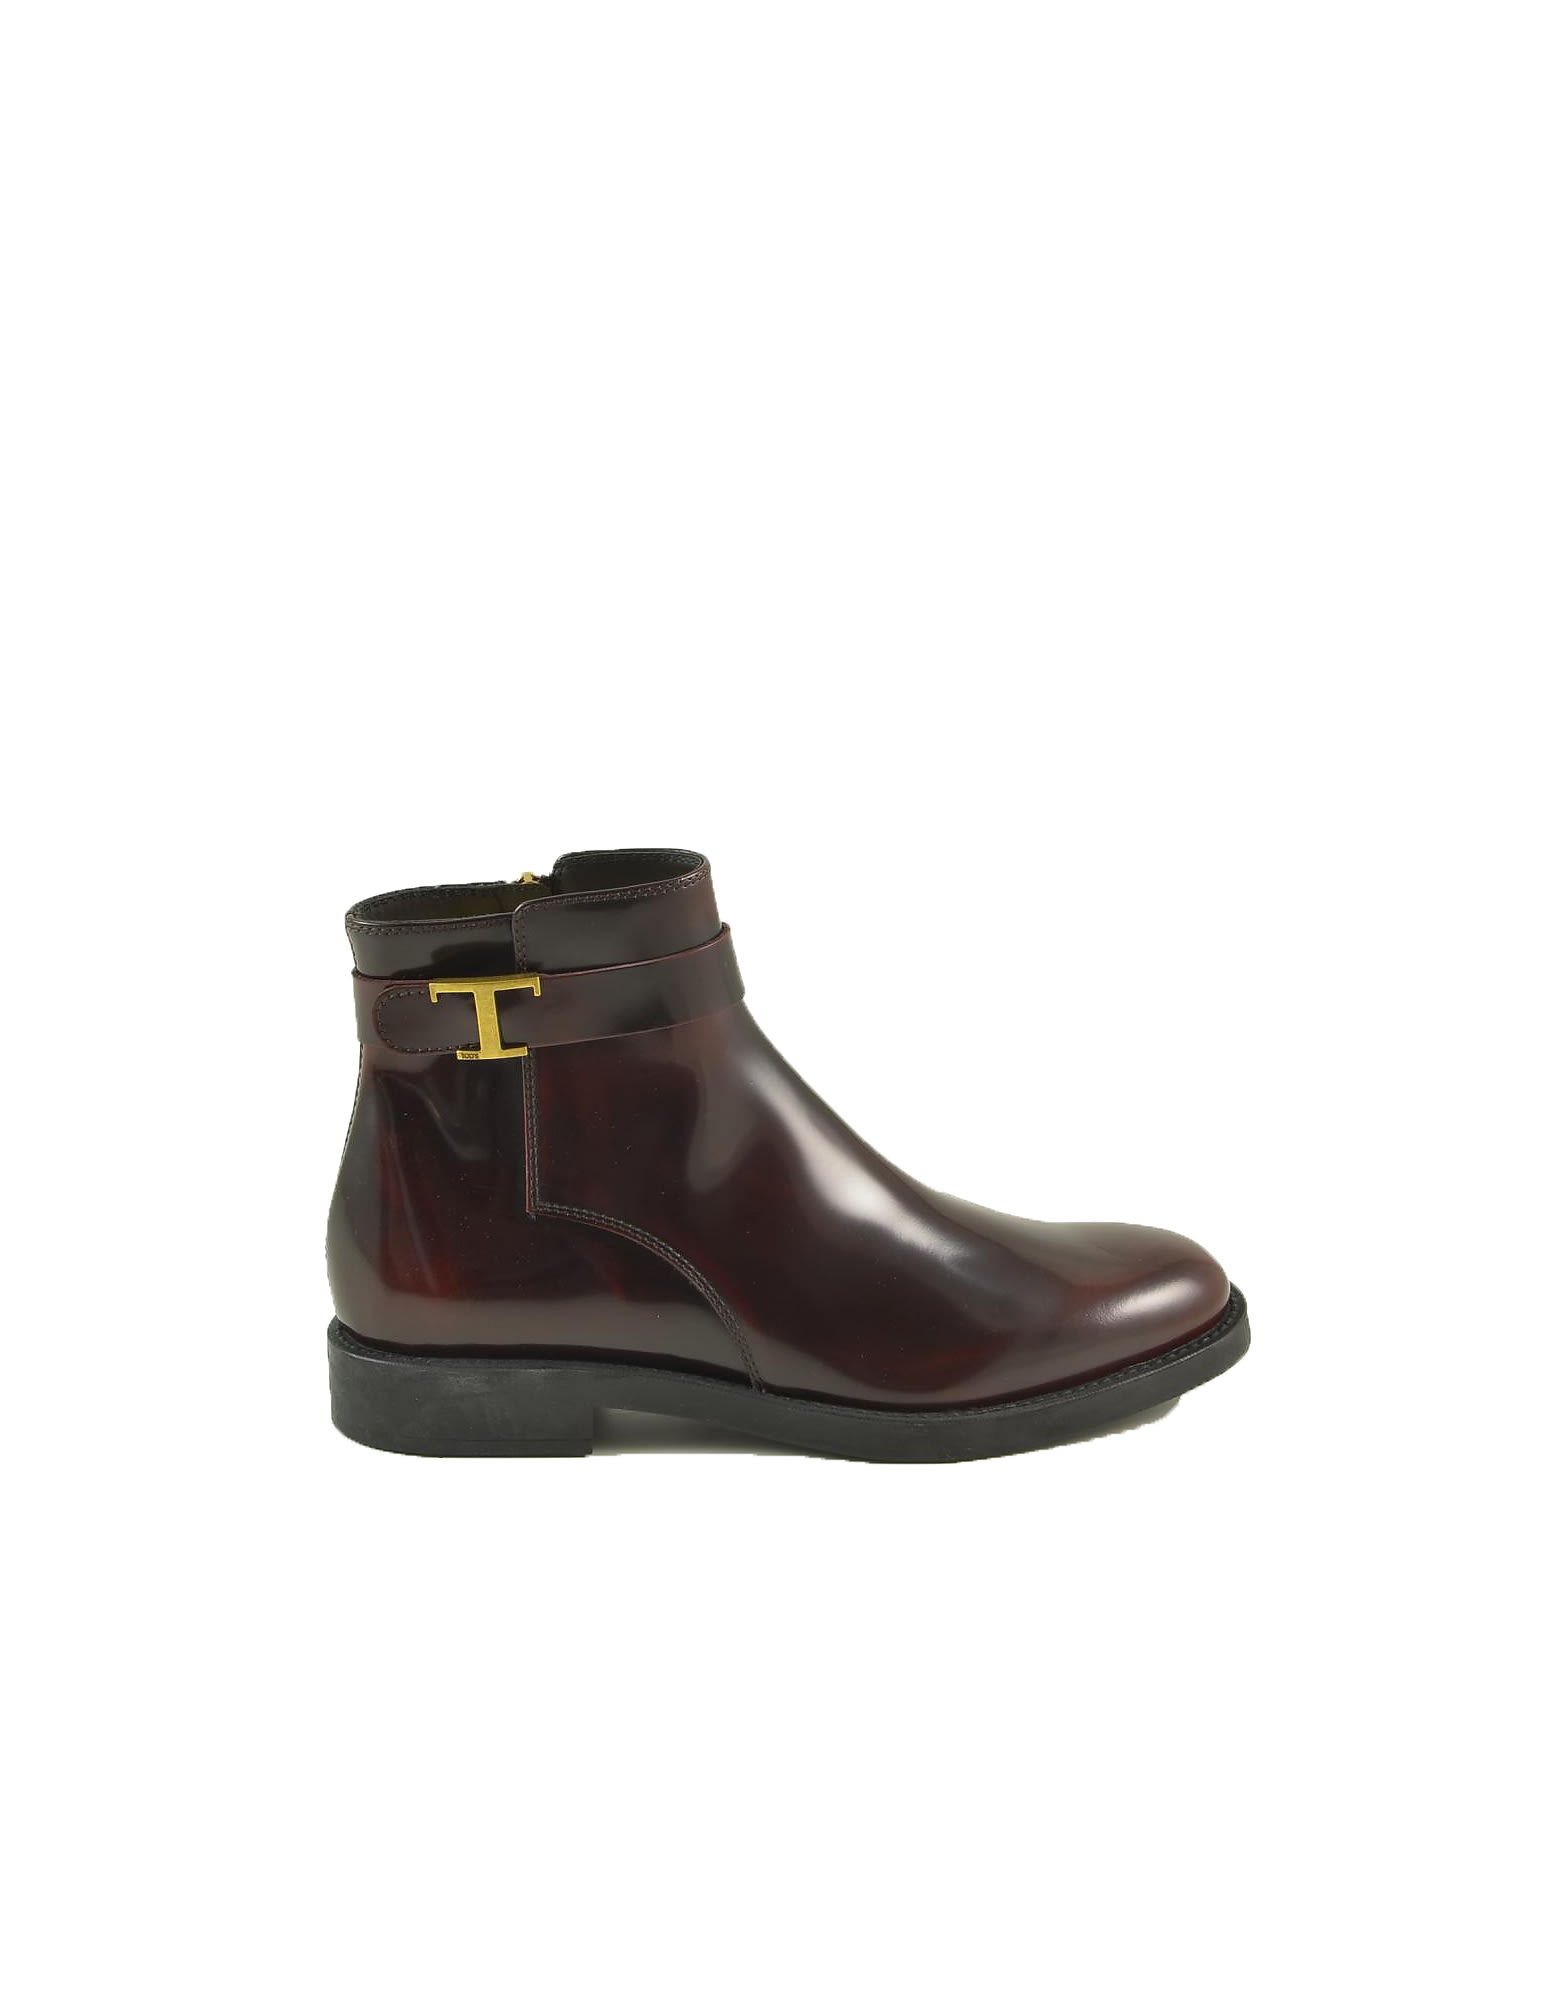 Tods Bordeaux Leather T Booties